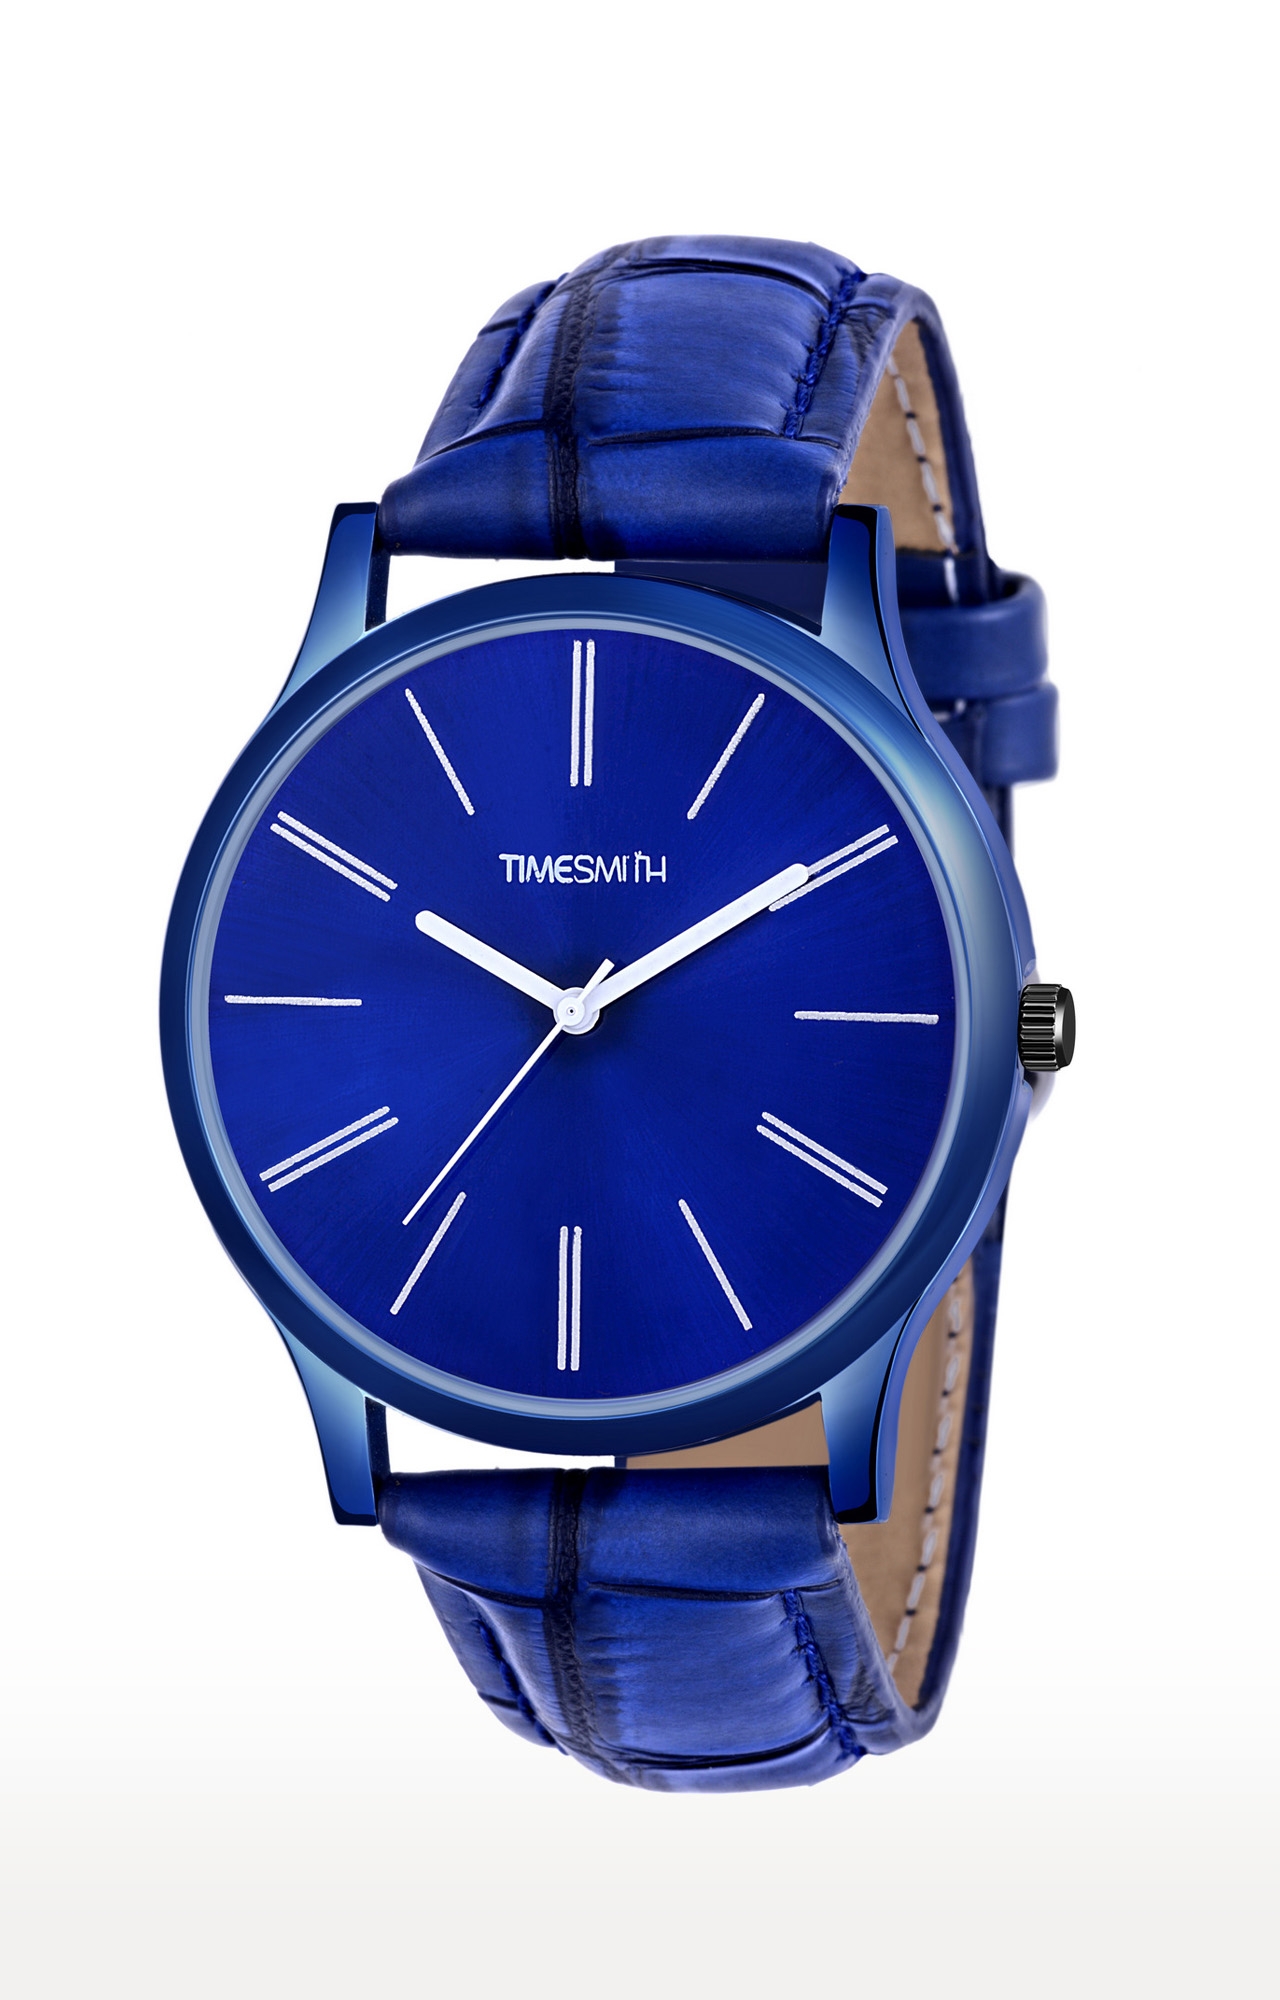 Timesmith | Timesmith Leather Blue Dial Watch For Men CTC-006mtn 0